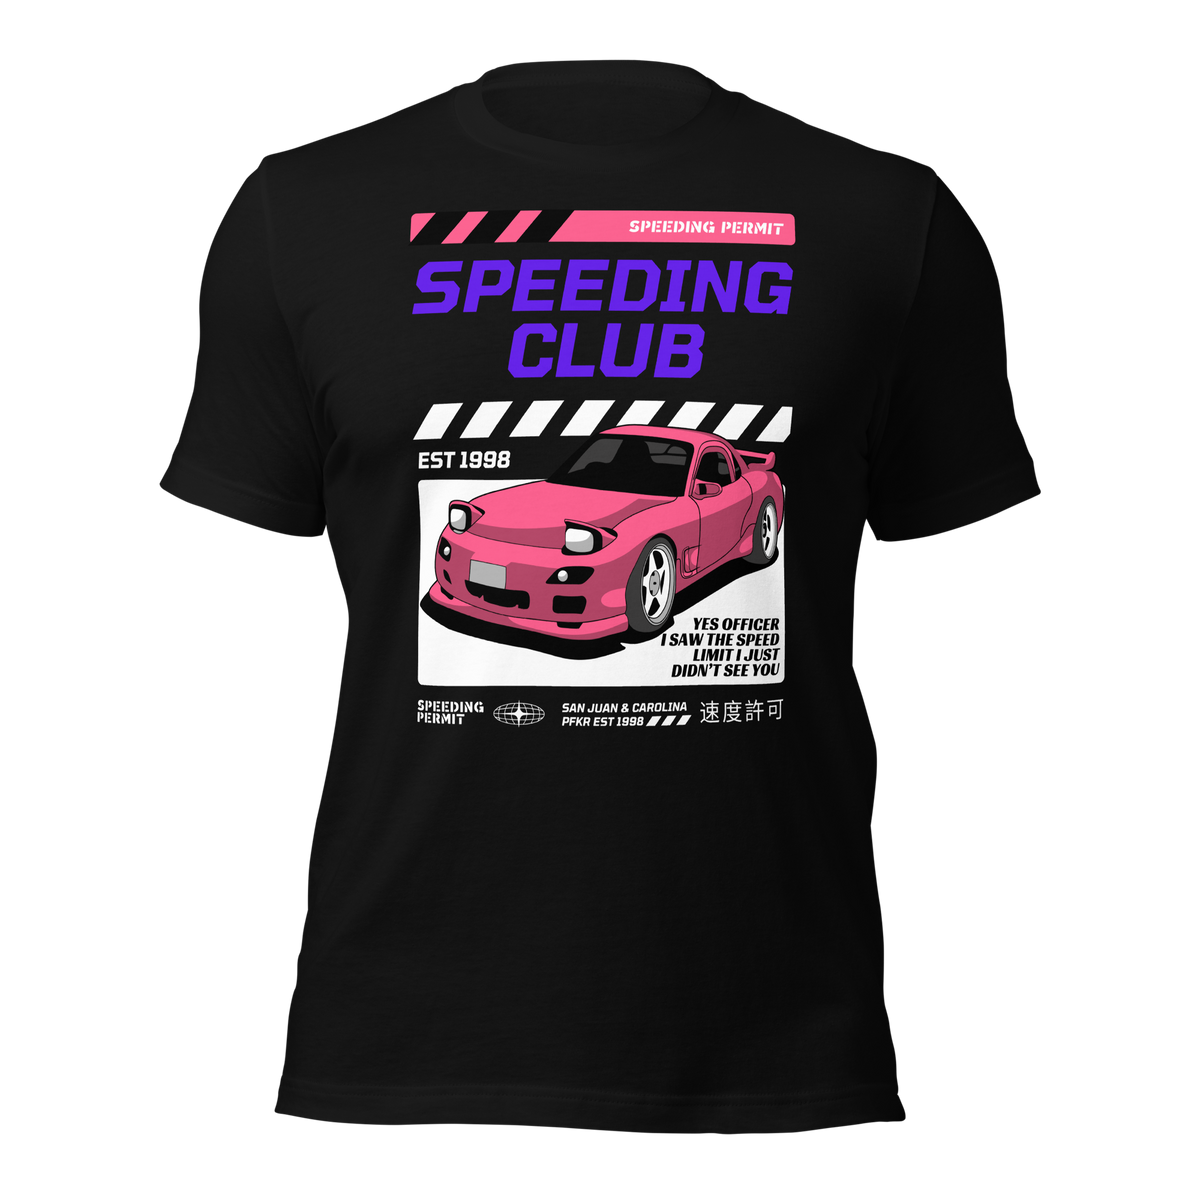 Japanese Car T-shirt, Funny Speeding tee, Speeding Ticket, Car Tee, Speeding Club, Yes Officer I saw the Speed Limit I Just didn't see you